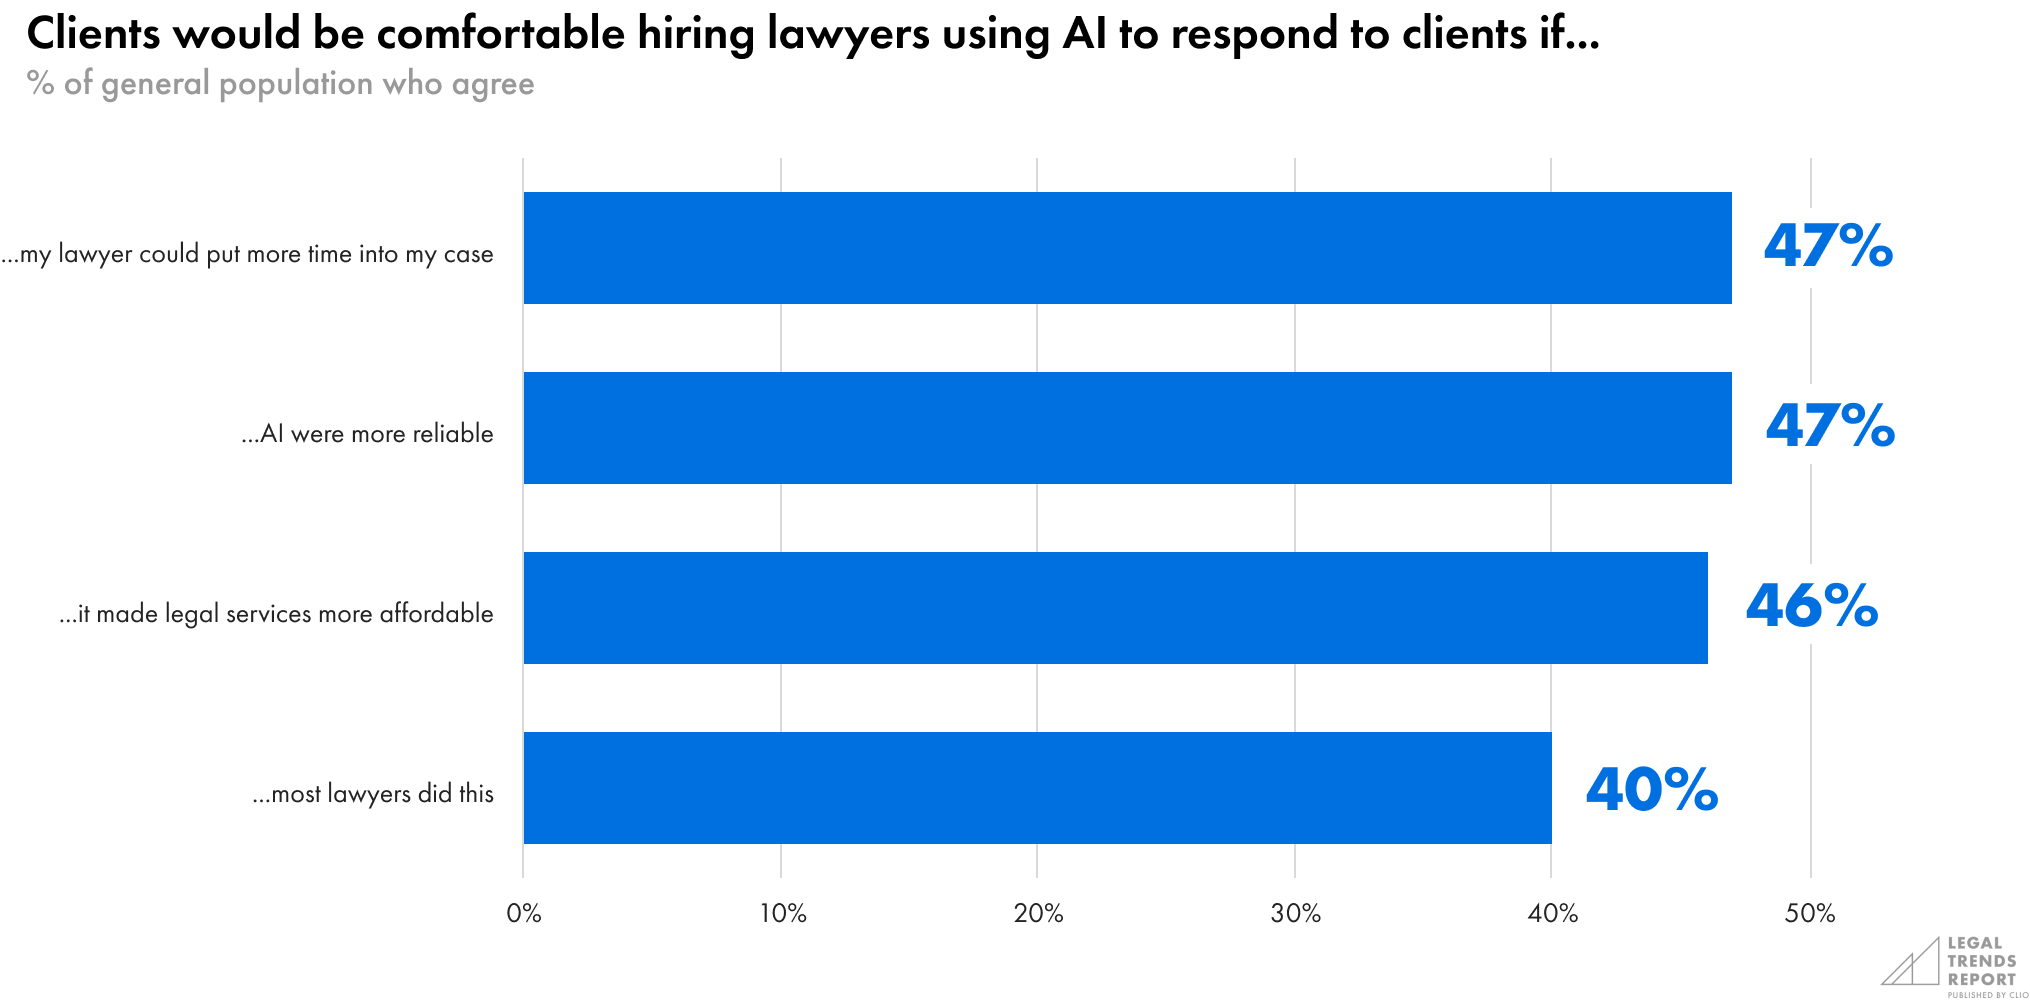 Clients would be comfortable hiring lawyers using AI to respond to clients if